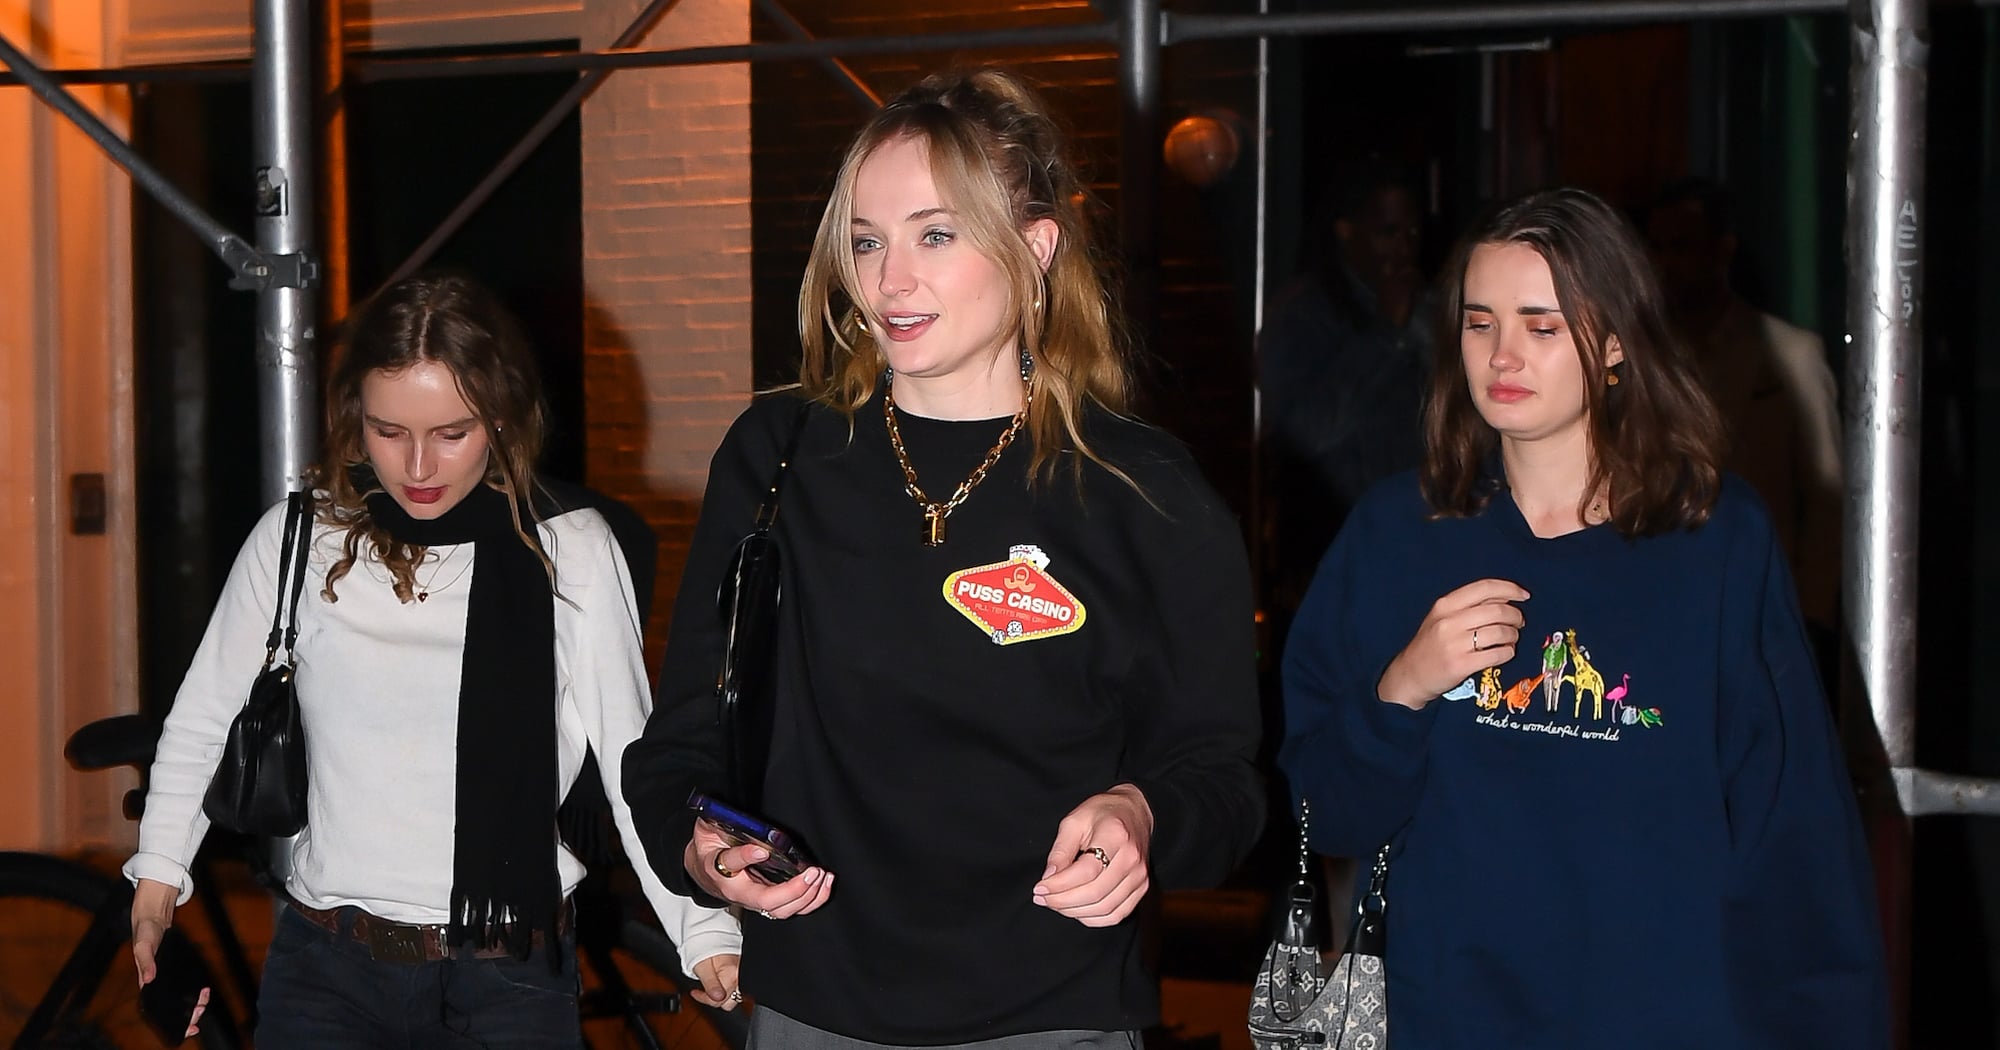 Yes, Sophie Turner Wore TikTok Merch to Dinner With Taylor Swift